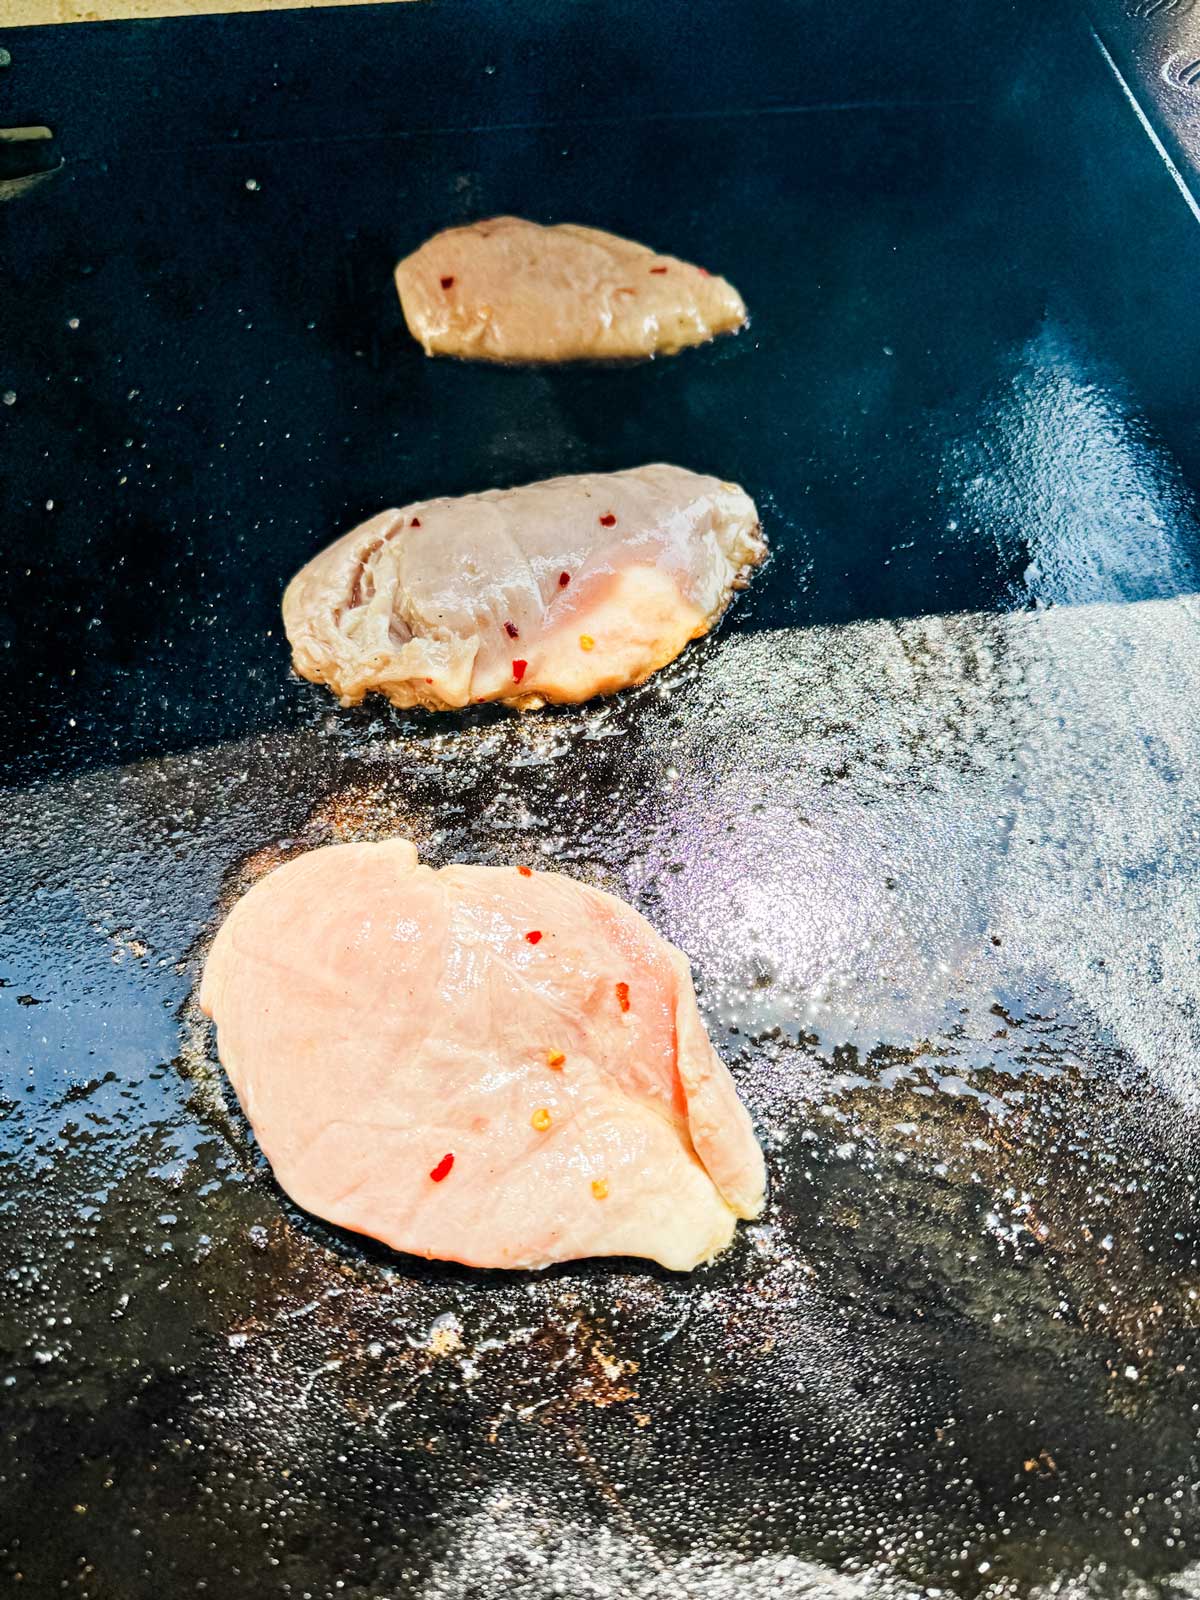 Raw marinated chicken just added to a Blackstone griddle.